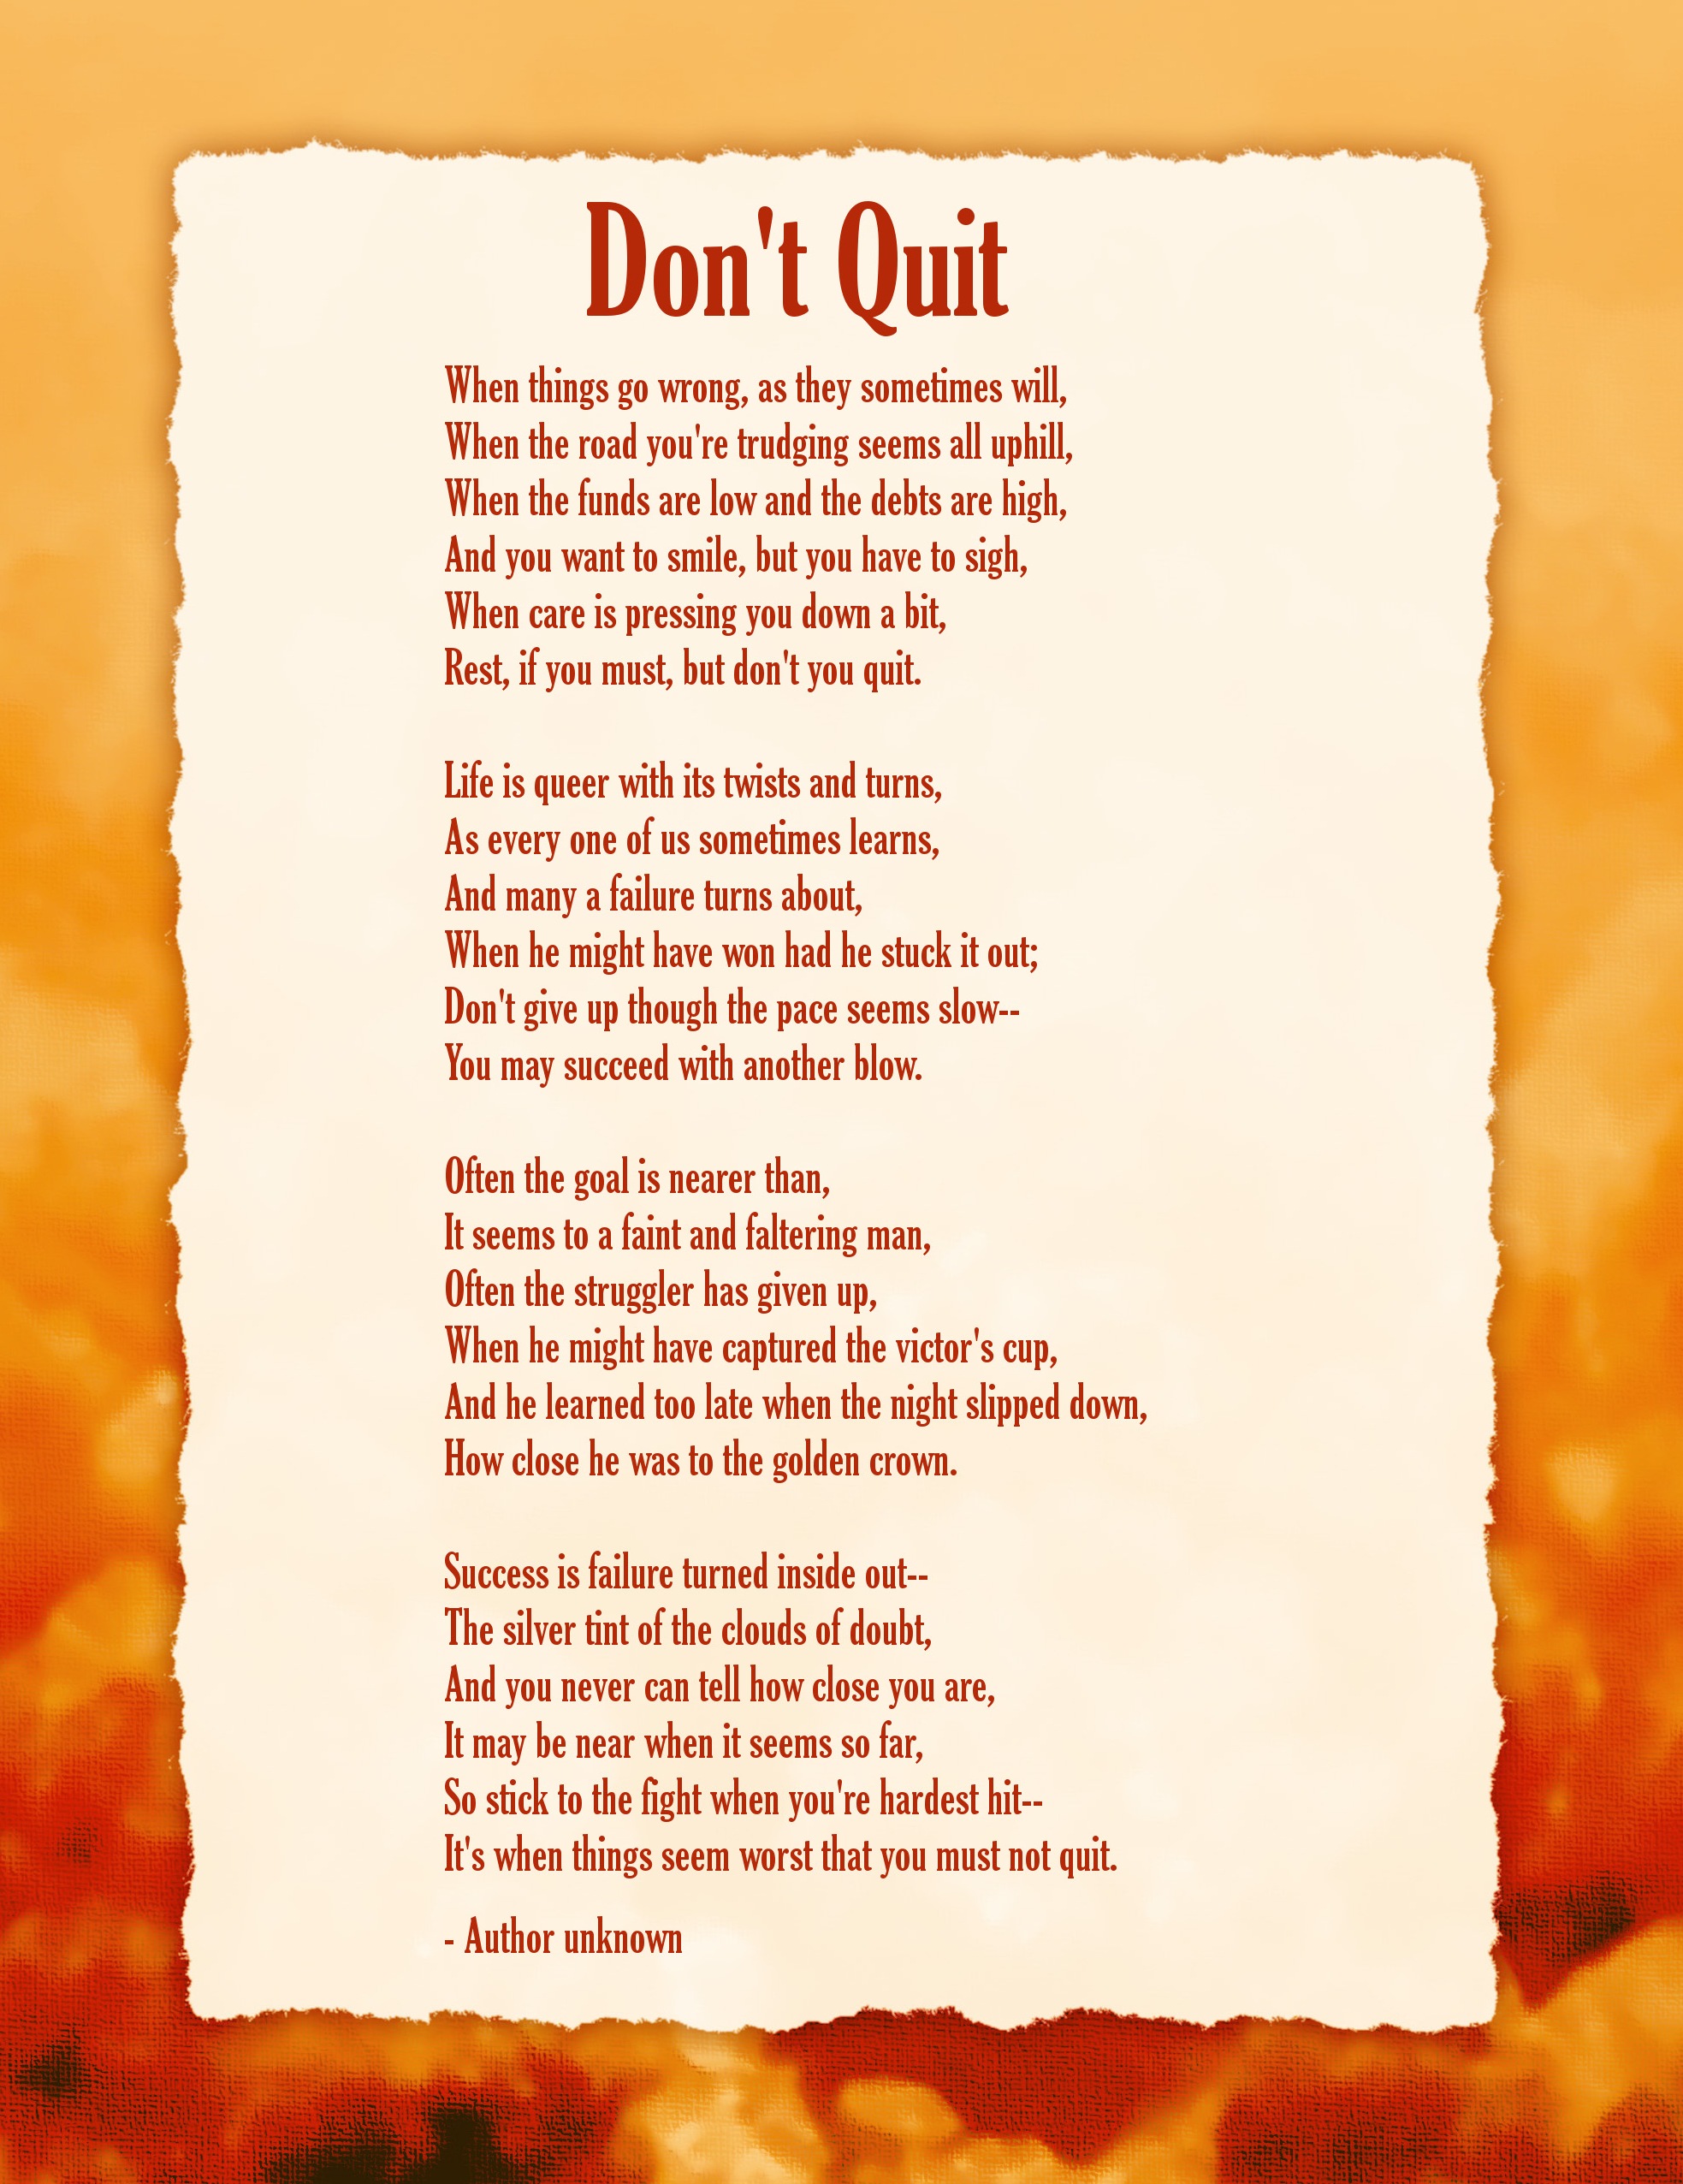 Inspirational quotes and poems quote poem Dont Quit